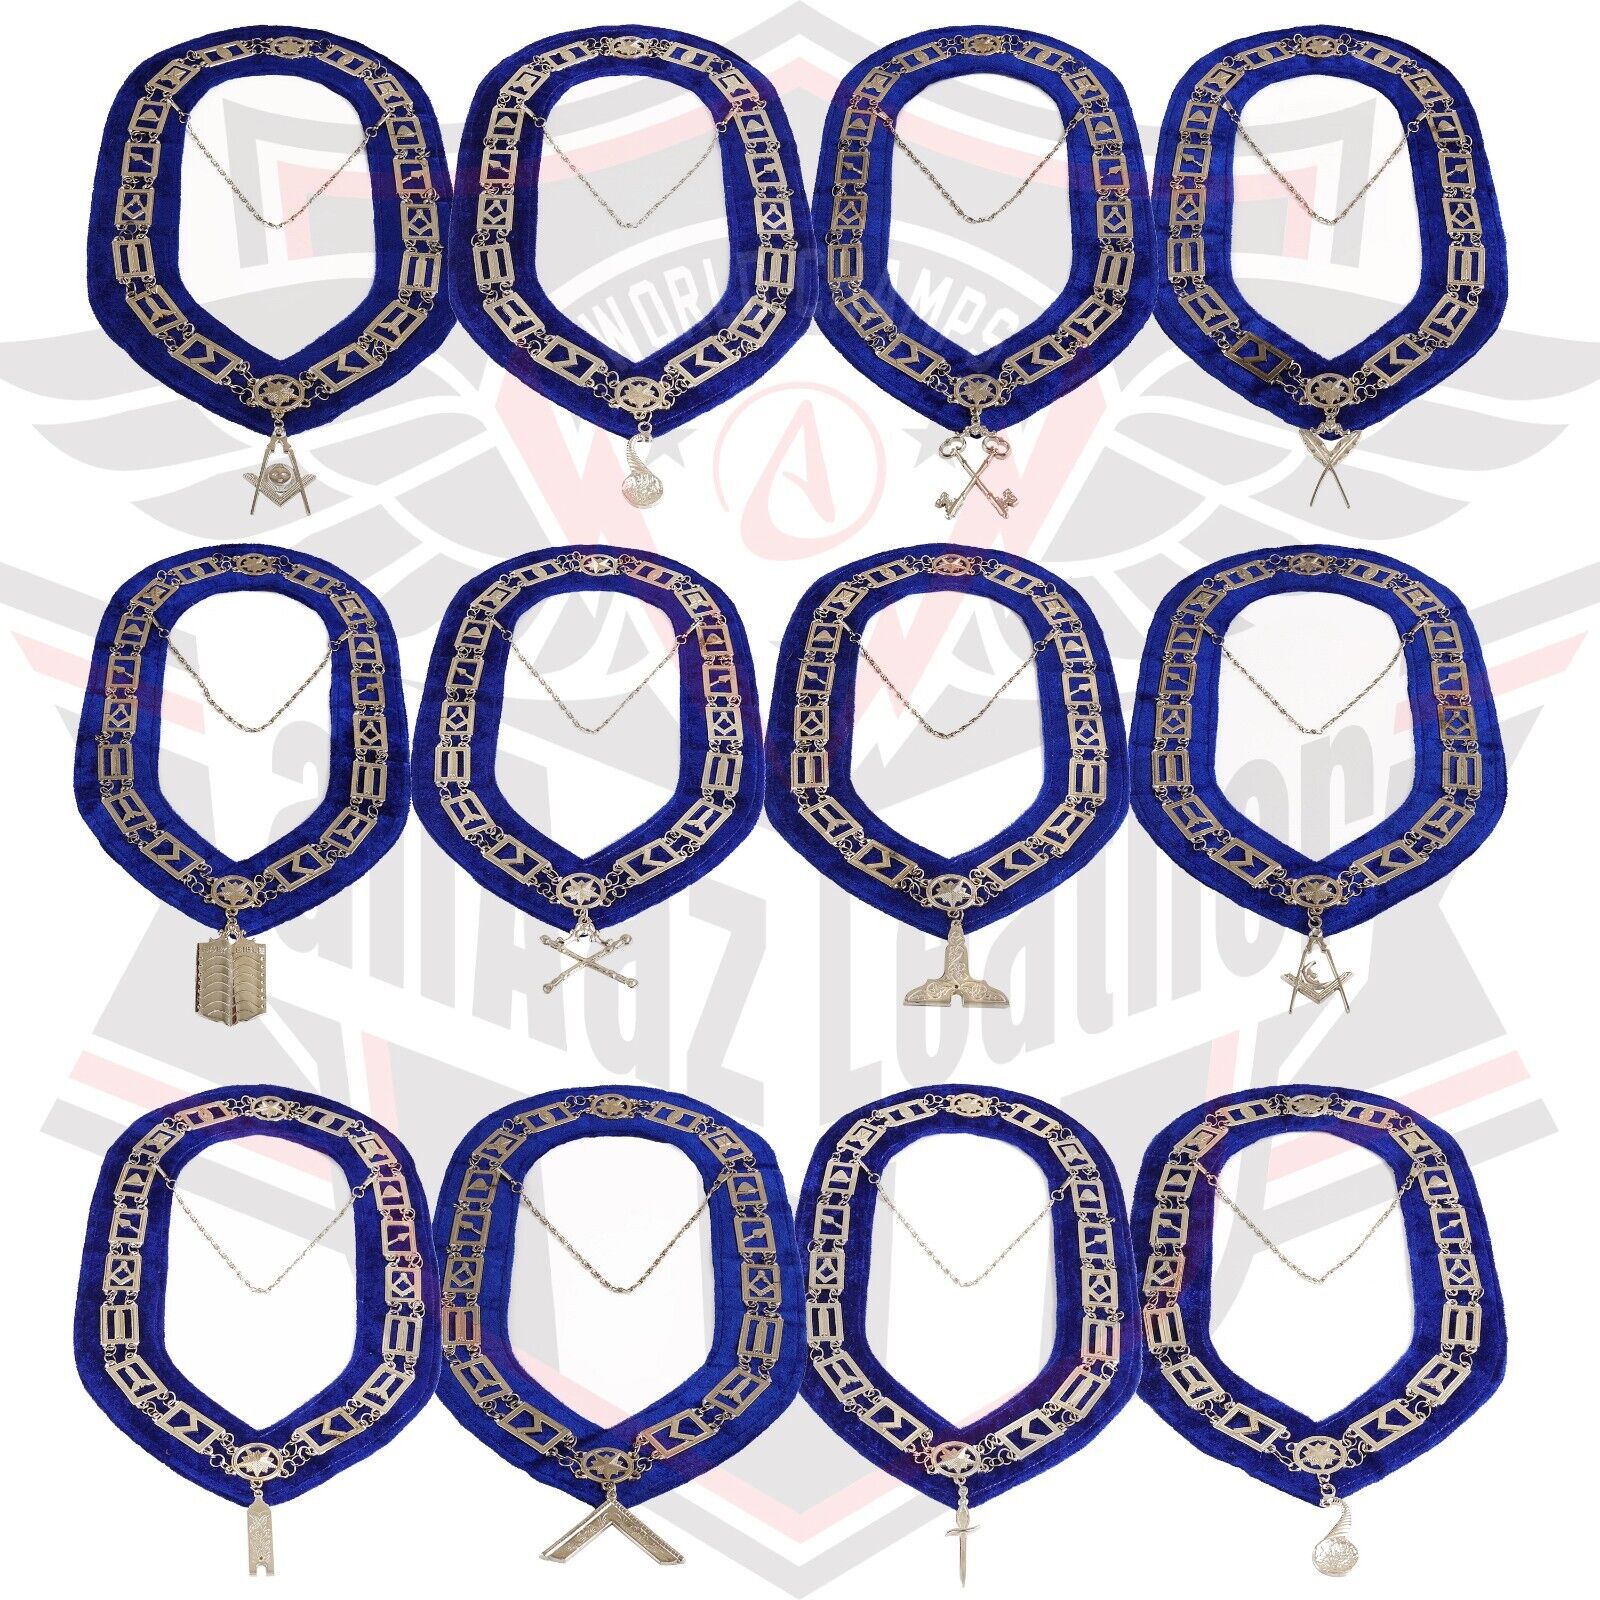 Masonic Silver Blue Lodge Chain Collar With Silver Jewels Blue Backing Set Of 12